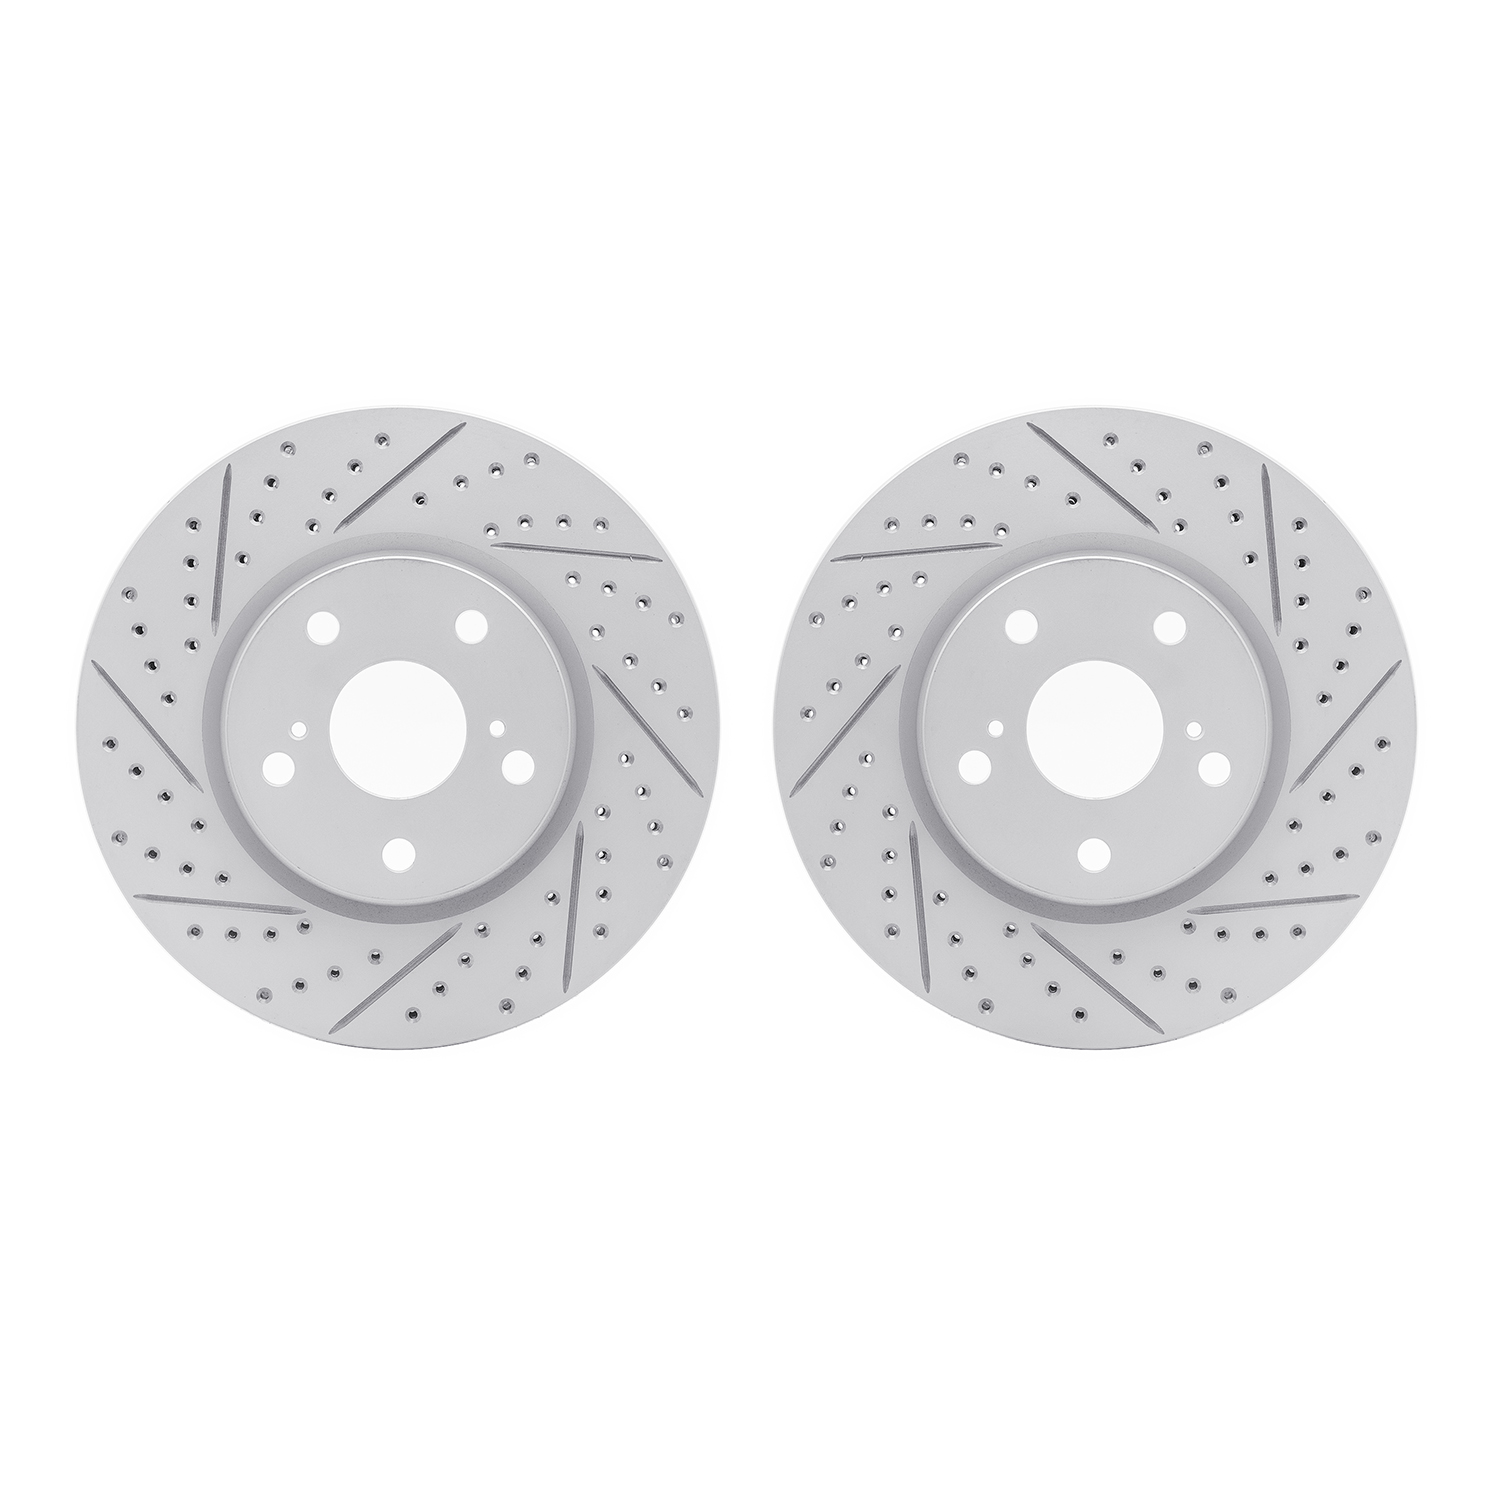 2002-75003 Geoperformance Drilled/Slotted Brake Rotors, 2006-2015 Lexus/Toyota/Scion, Position: Front